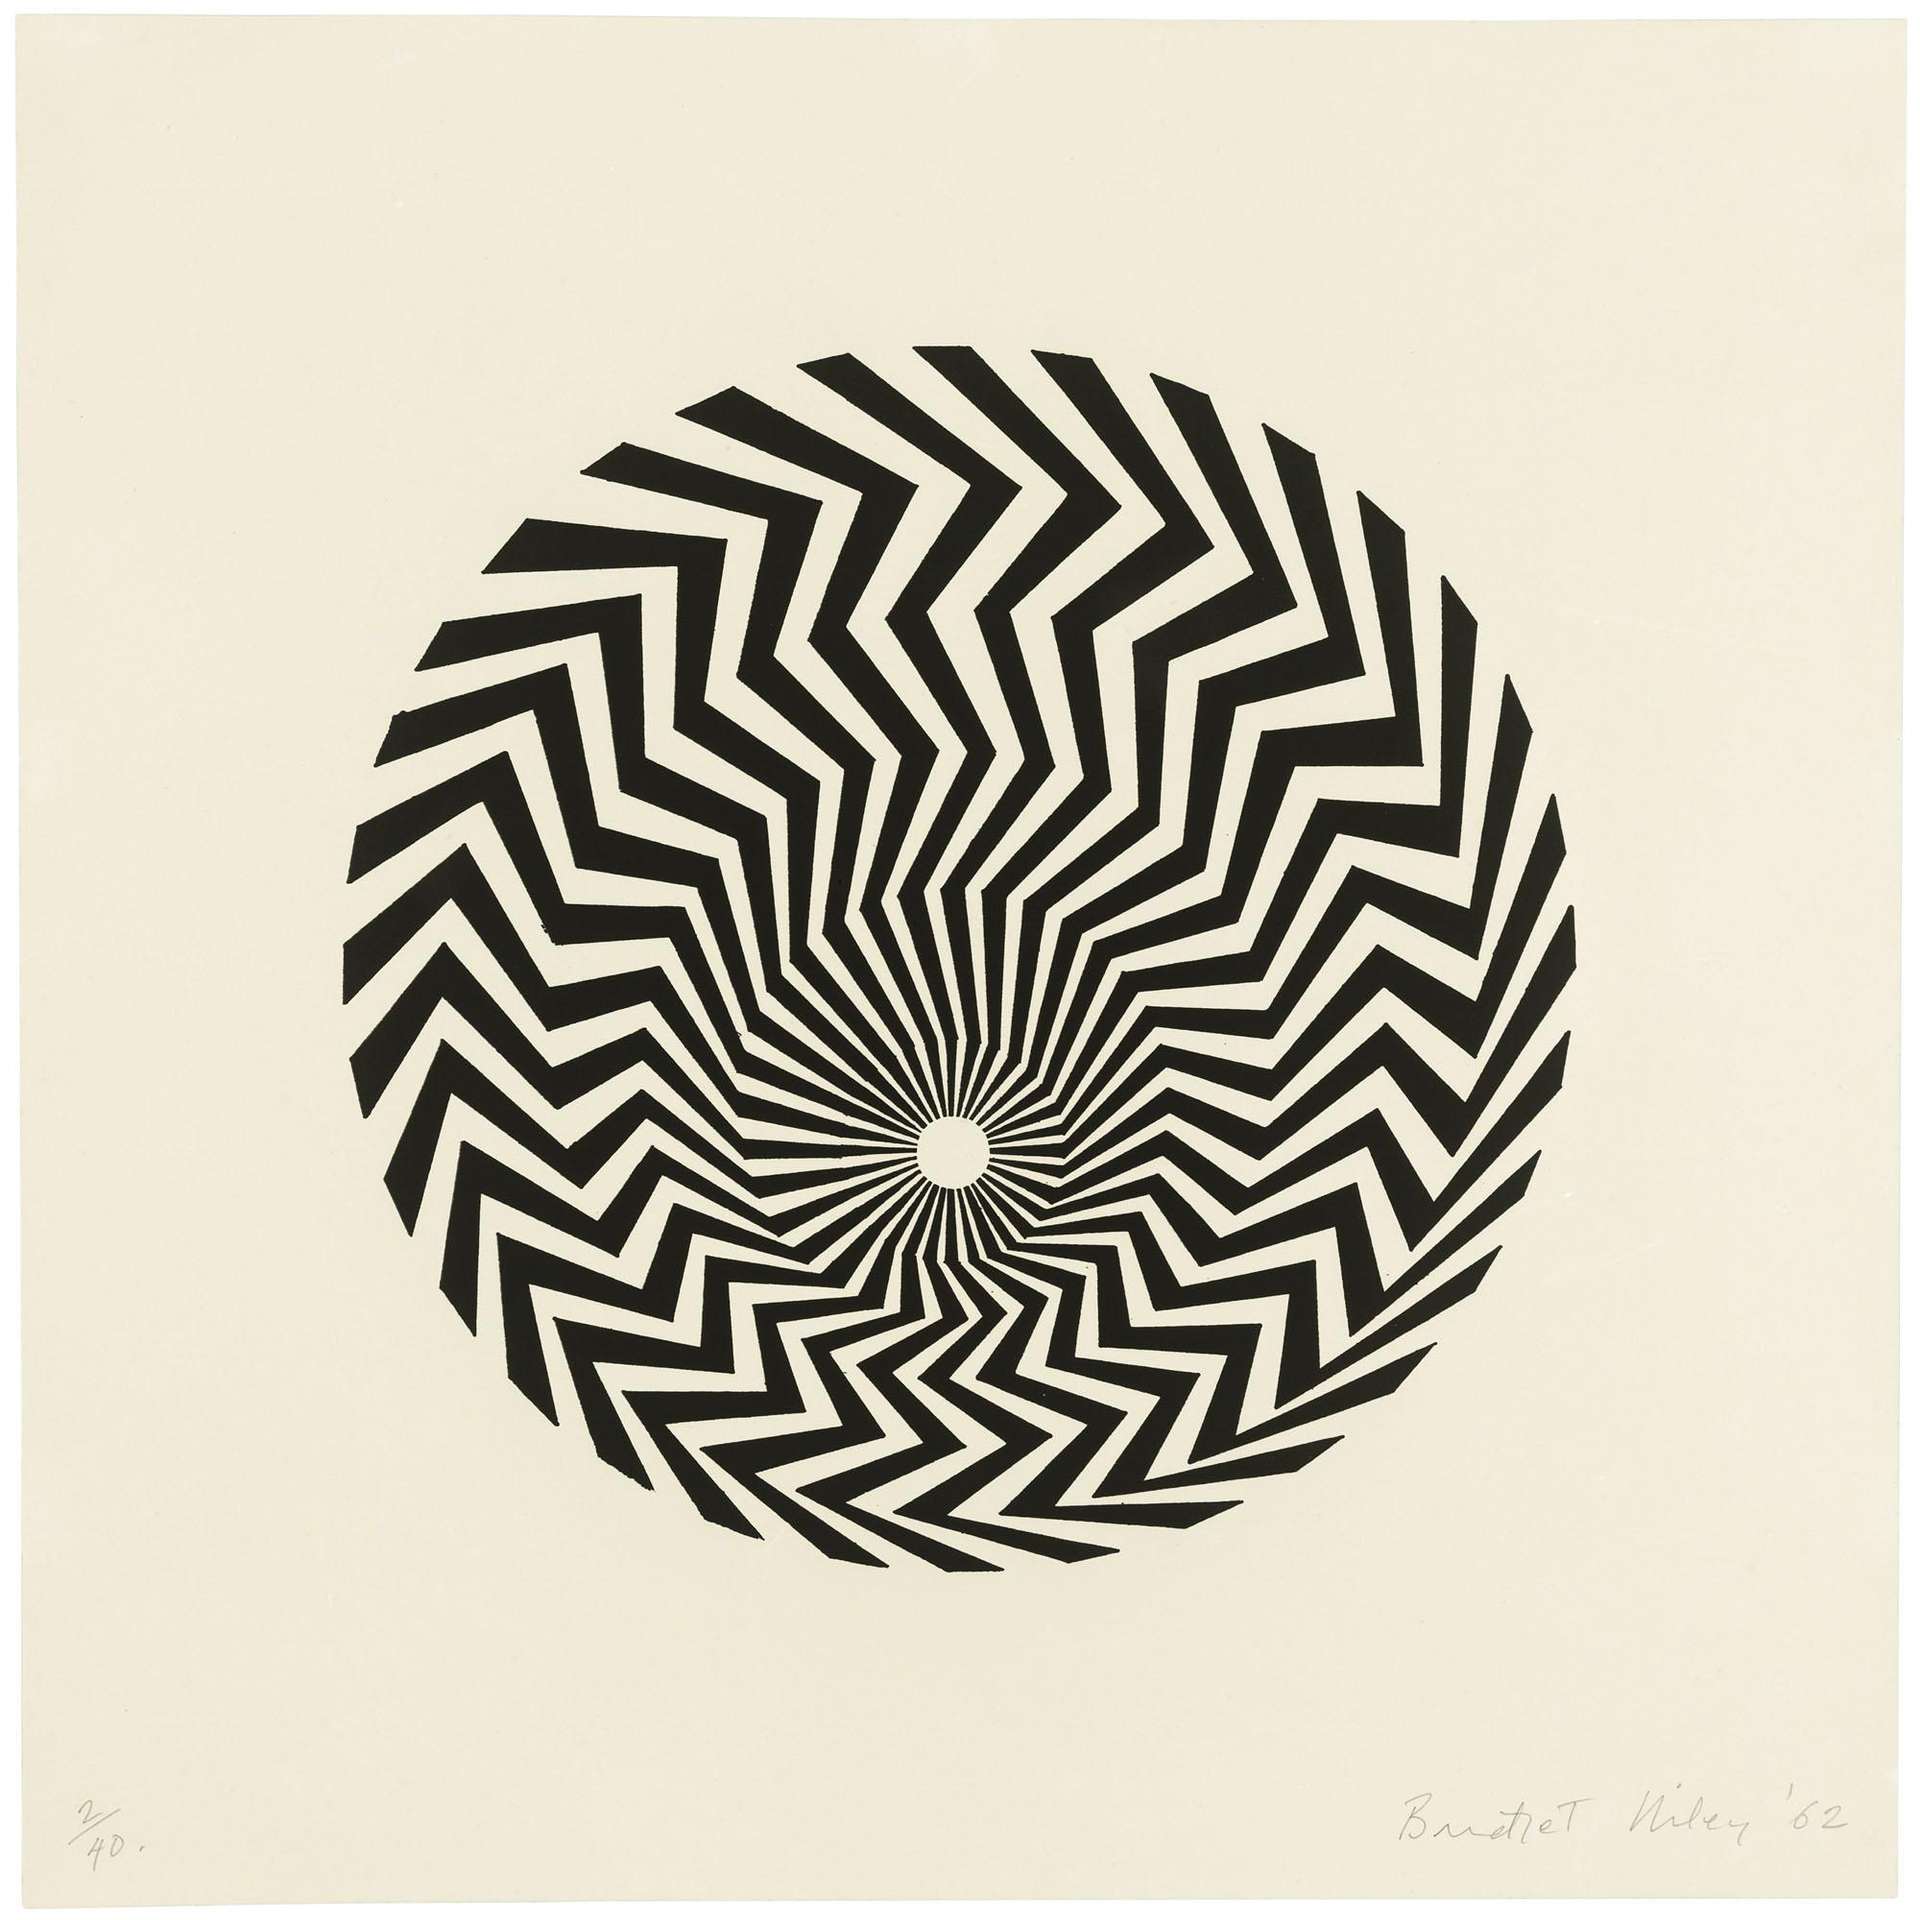 Print with a fascinating pattern composed of zig zagging black lines. A circle is rendered in the centre of the composition and thick black zig zags emanate from the centre of the circle.